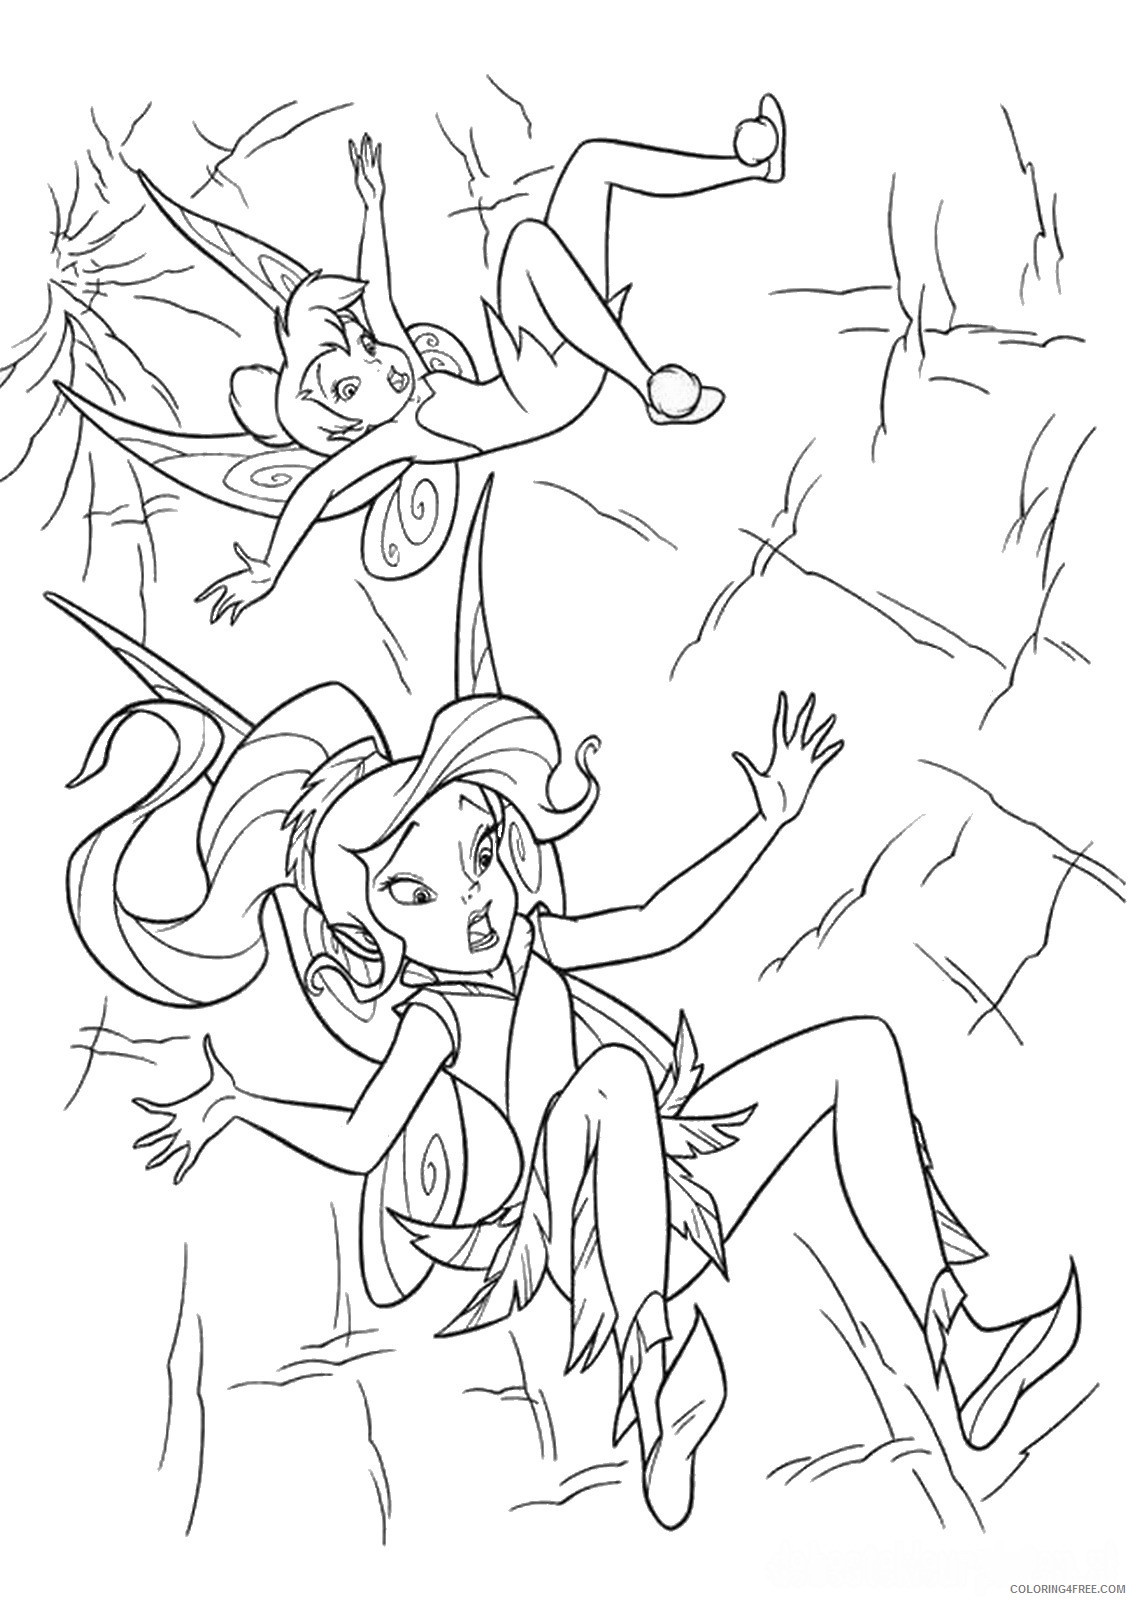 Tinker Bell Coloring Pages Cartoons tinkerbell_cl_24 Printable 2020 6631 Coloring4free